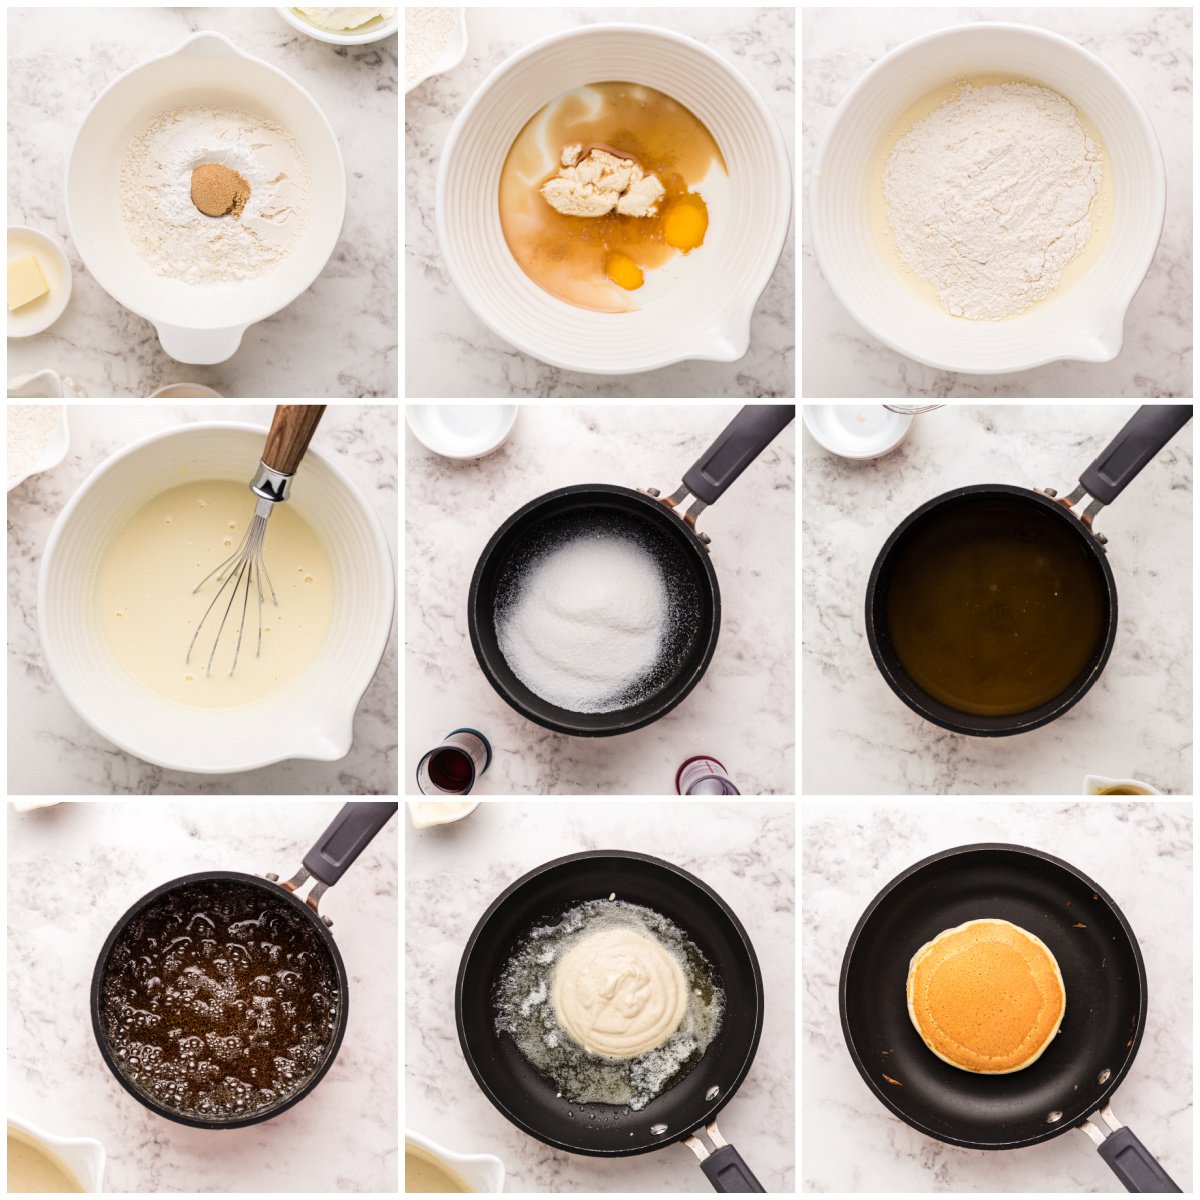 Step by step photos on how to make Ricotta Pancakes.